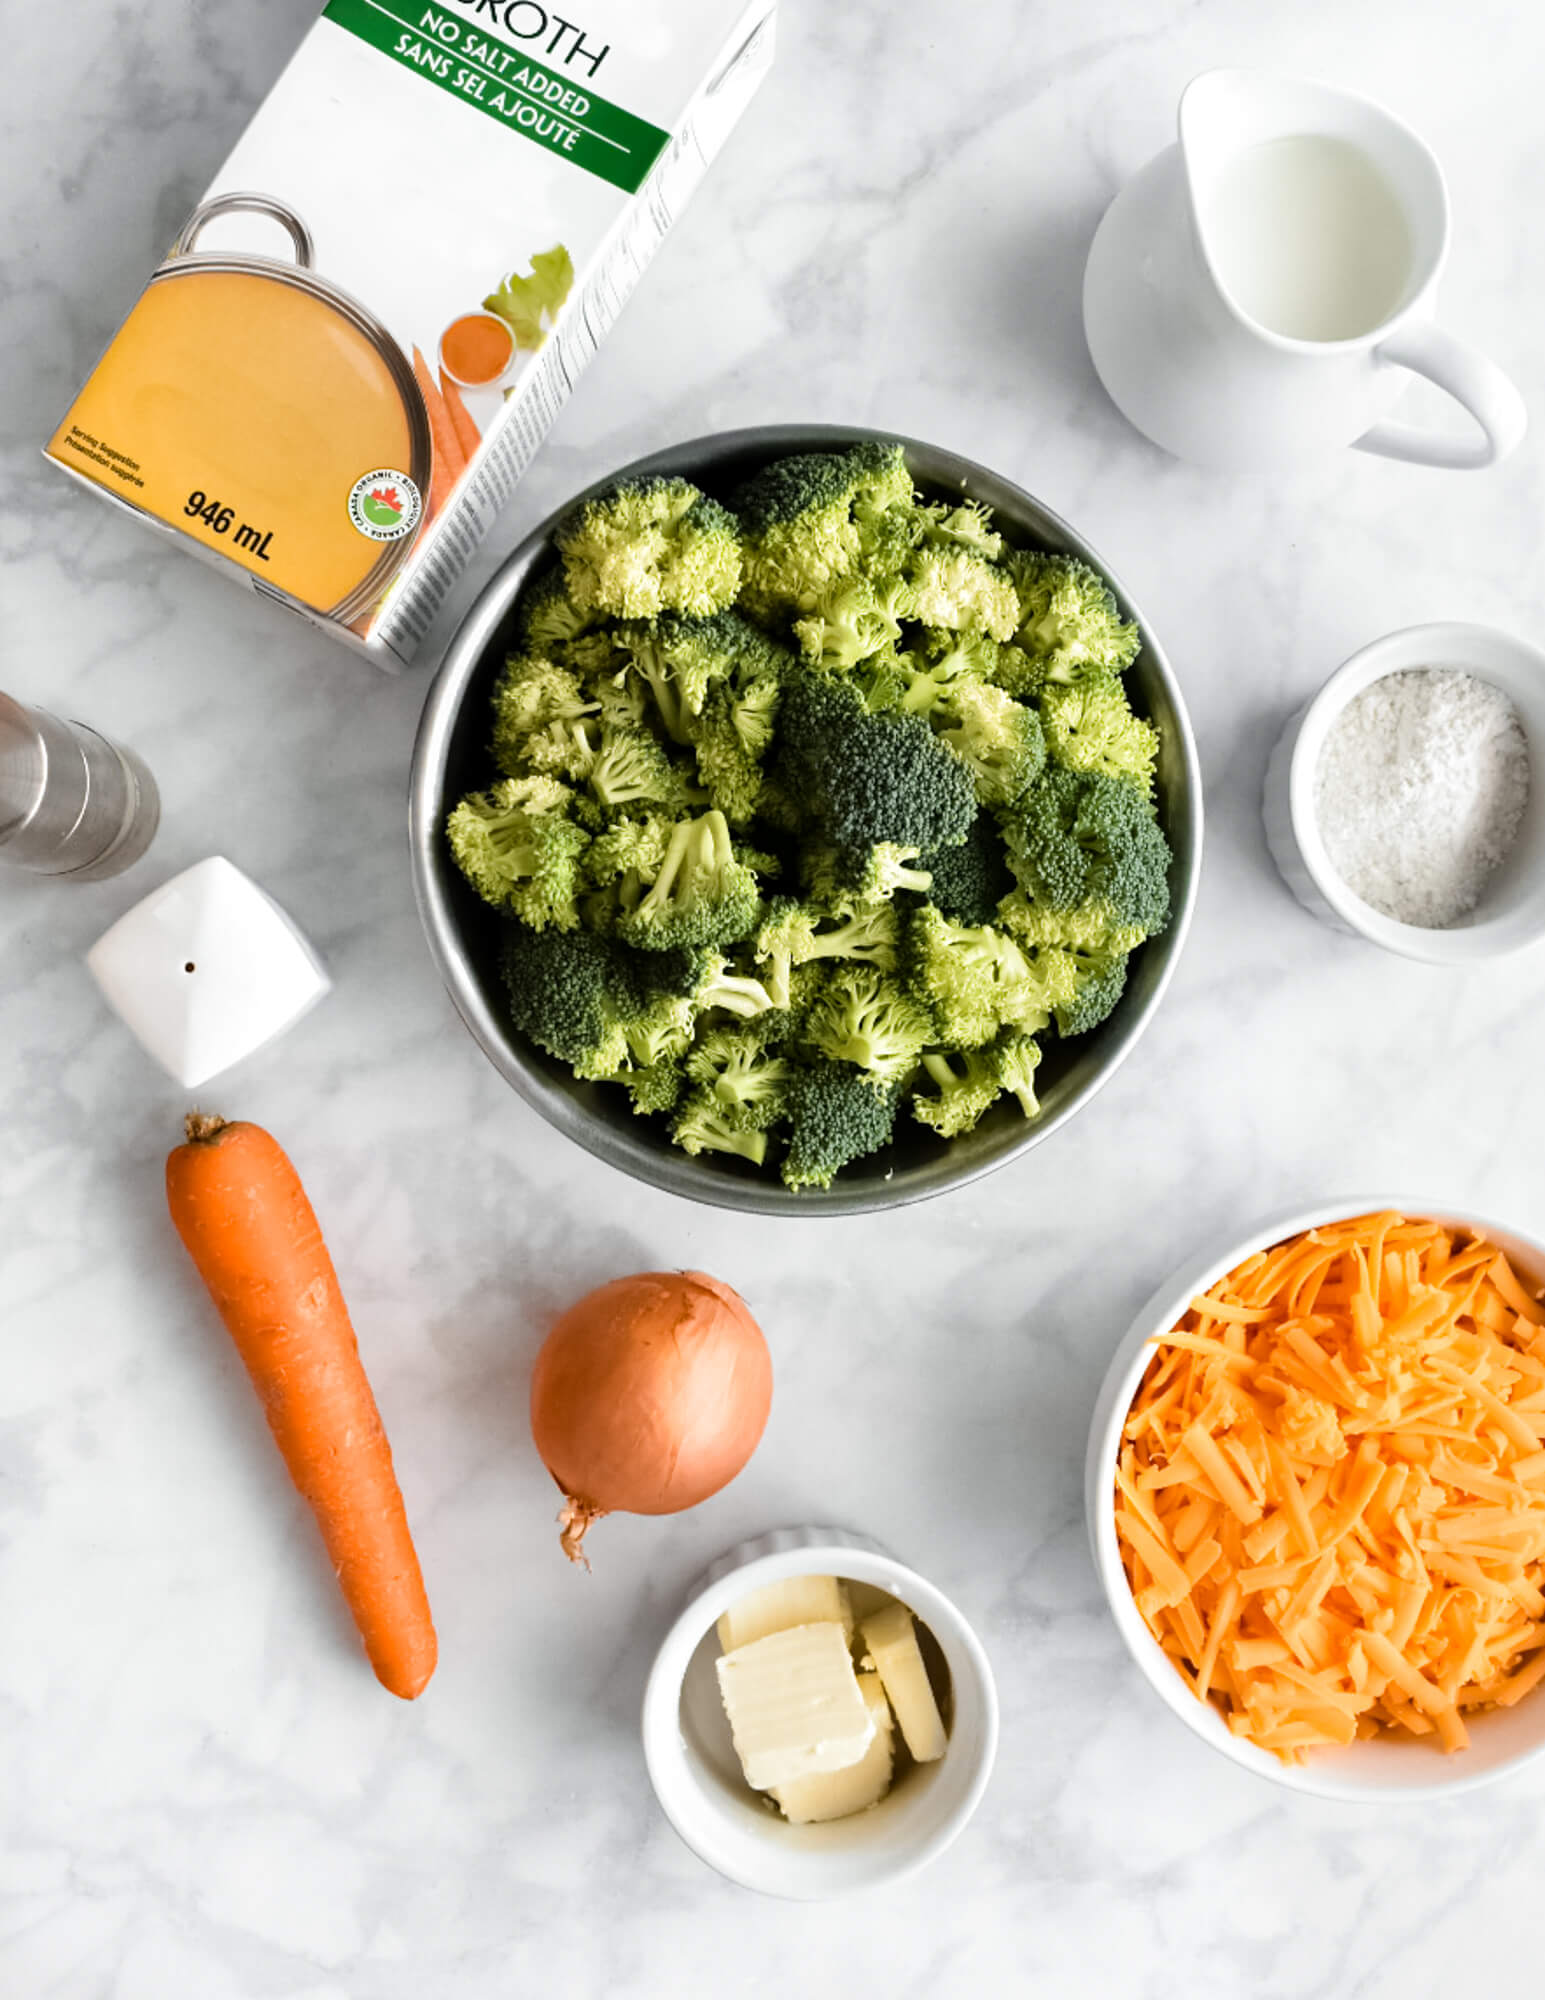 The ingredients for broccoli cheddar soup including a bowl of broccoli florets, a carrot, an onion, a bowl of shredded cheddar, butter, a bowl of flour, a small jug of milk, and salt and pepper shakers on a grey marble counter.